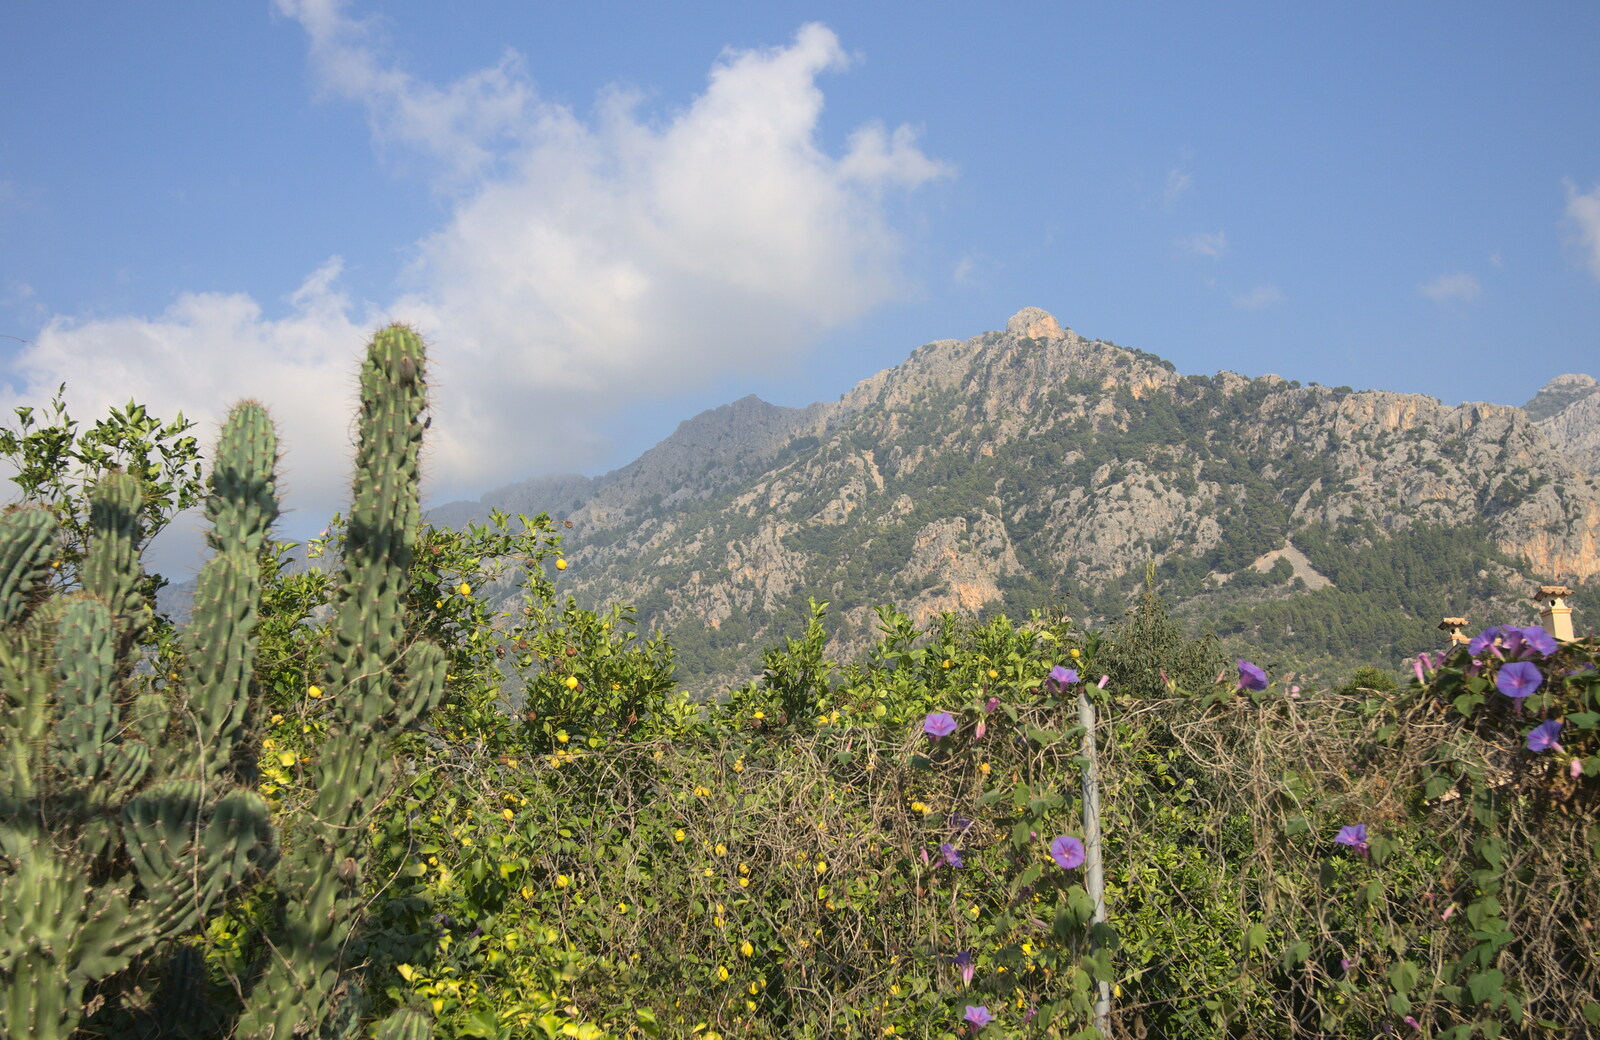 Cacti and mountains from A Trip to Sóller, Mallorca, Spain - 8th-14th September 2012